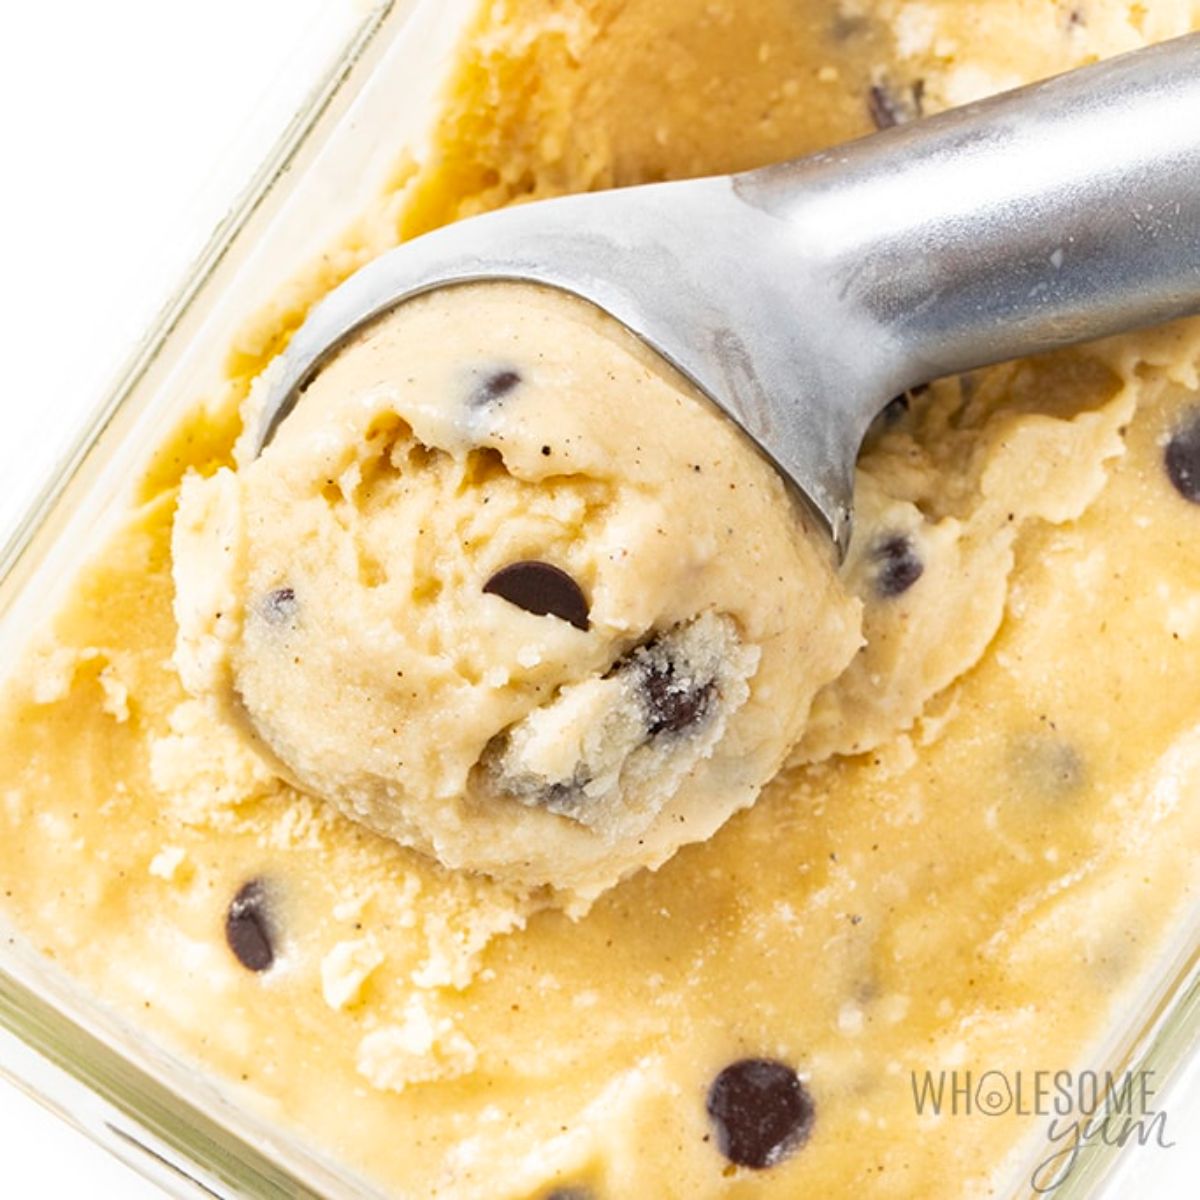 Sugar-Free Almond Milk Ice Cream in a glass container with a spoon.